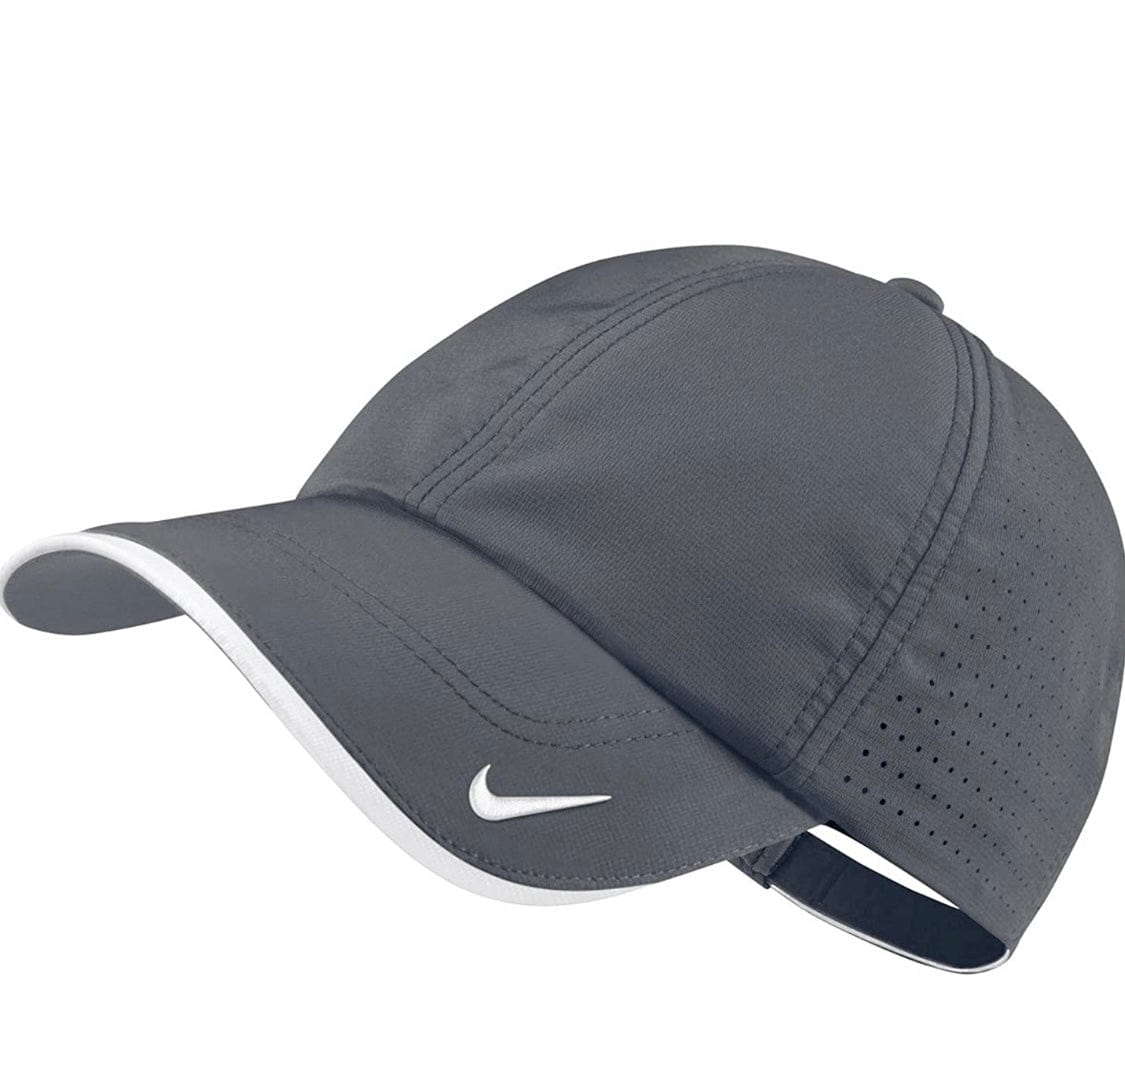 Nike Baseball Caps Anthracite Grey Nike- Dry Fit Ball Cap equestrian team apparel online tack store mobile tack store custom farm apparel custom show stable clothing equestrian lifestyle horse show clothing riding clothes horses equestrian tack store